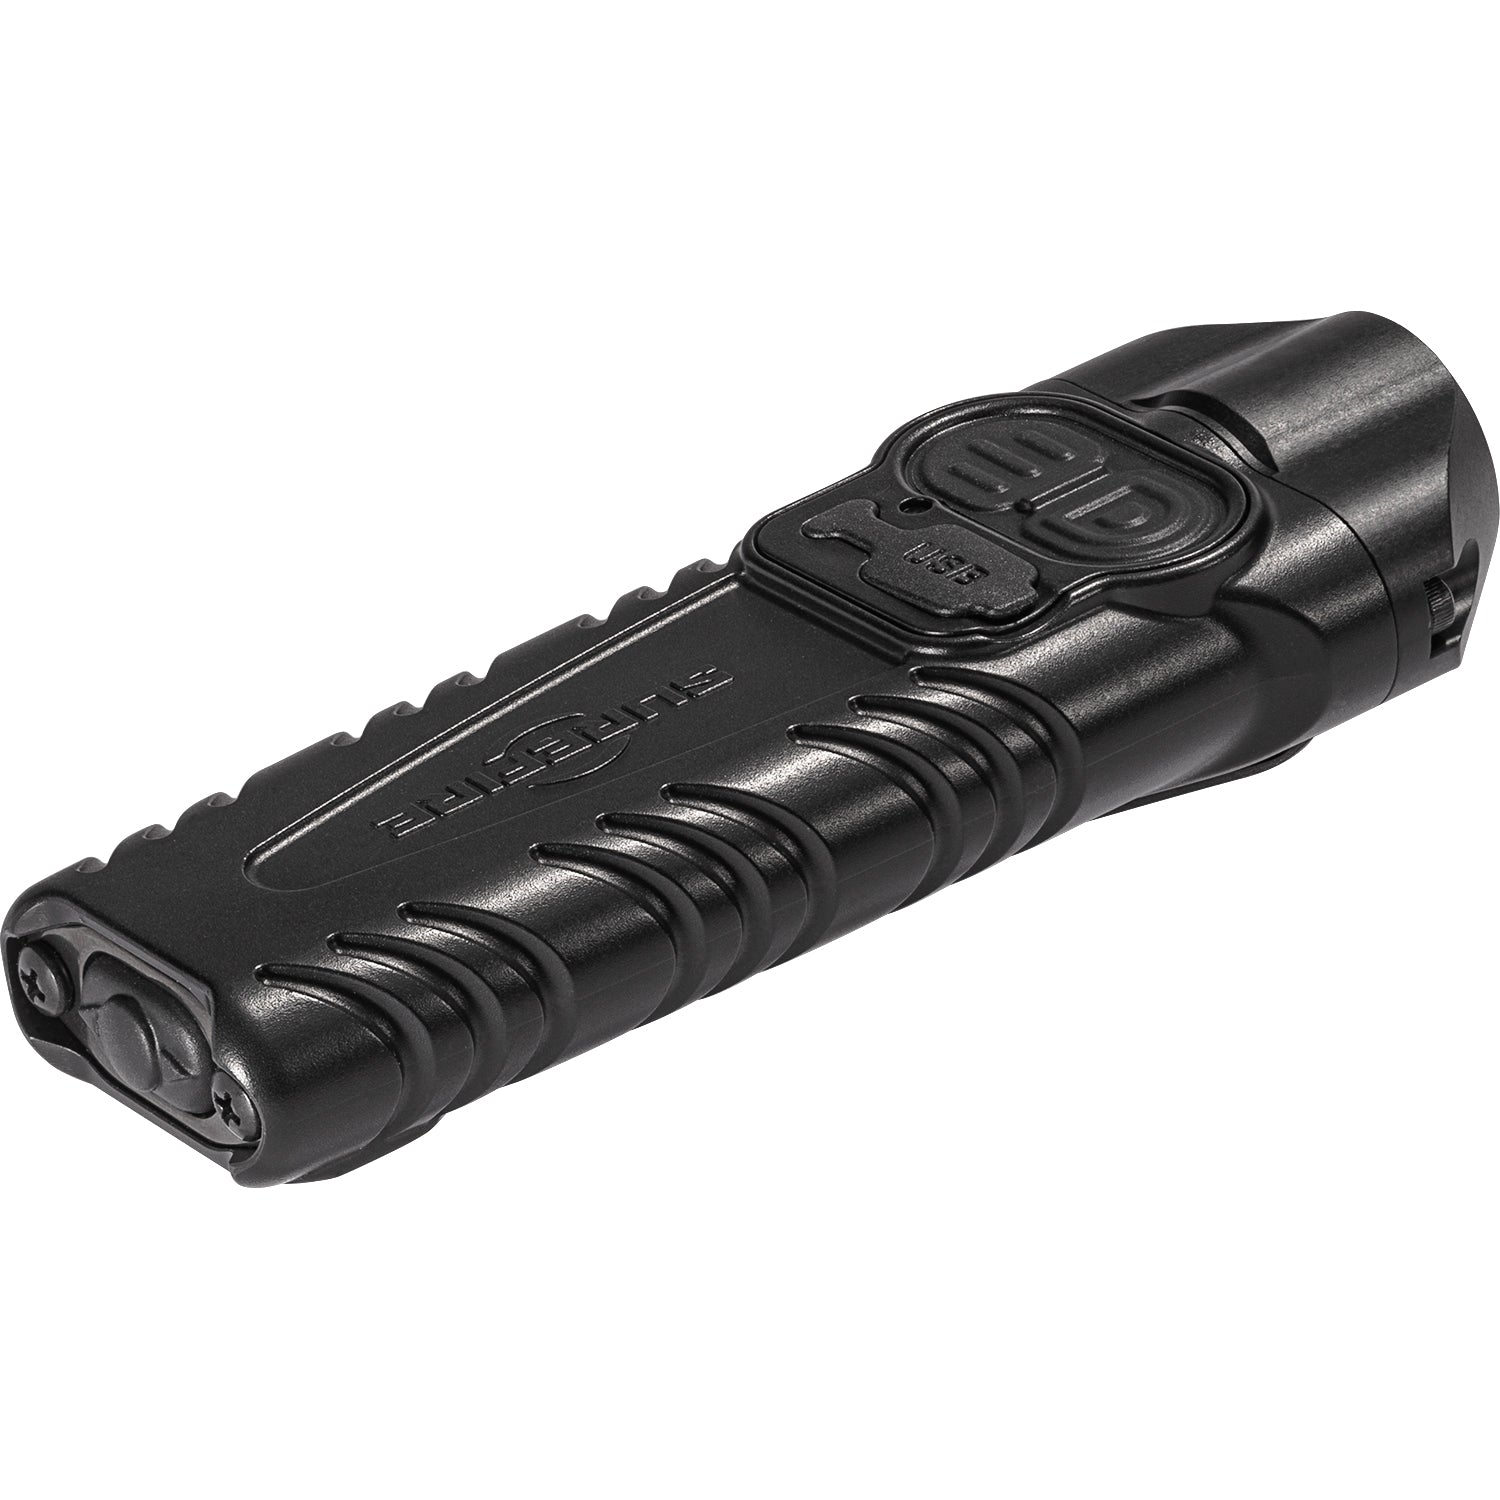 Surefire Stiletto Pro Multi-Output Rechargeable Pocket LED Flashlight with MaxVision Beam Flashlights and Lighting Surefire Tactical Gear Supplier Tactical Distributors Australia